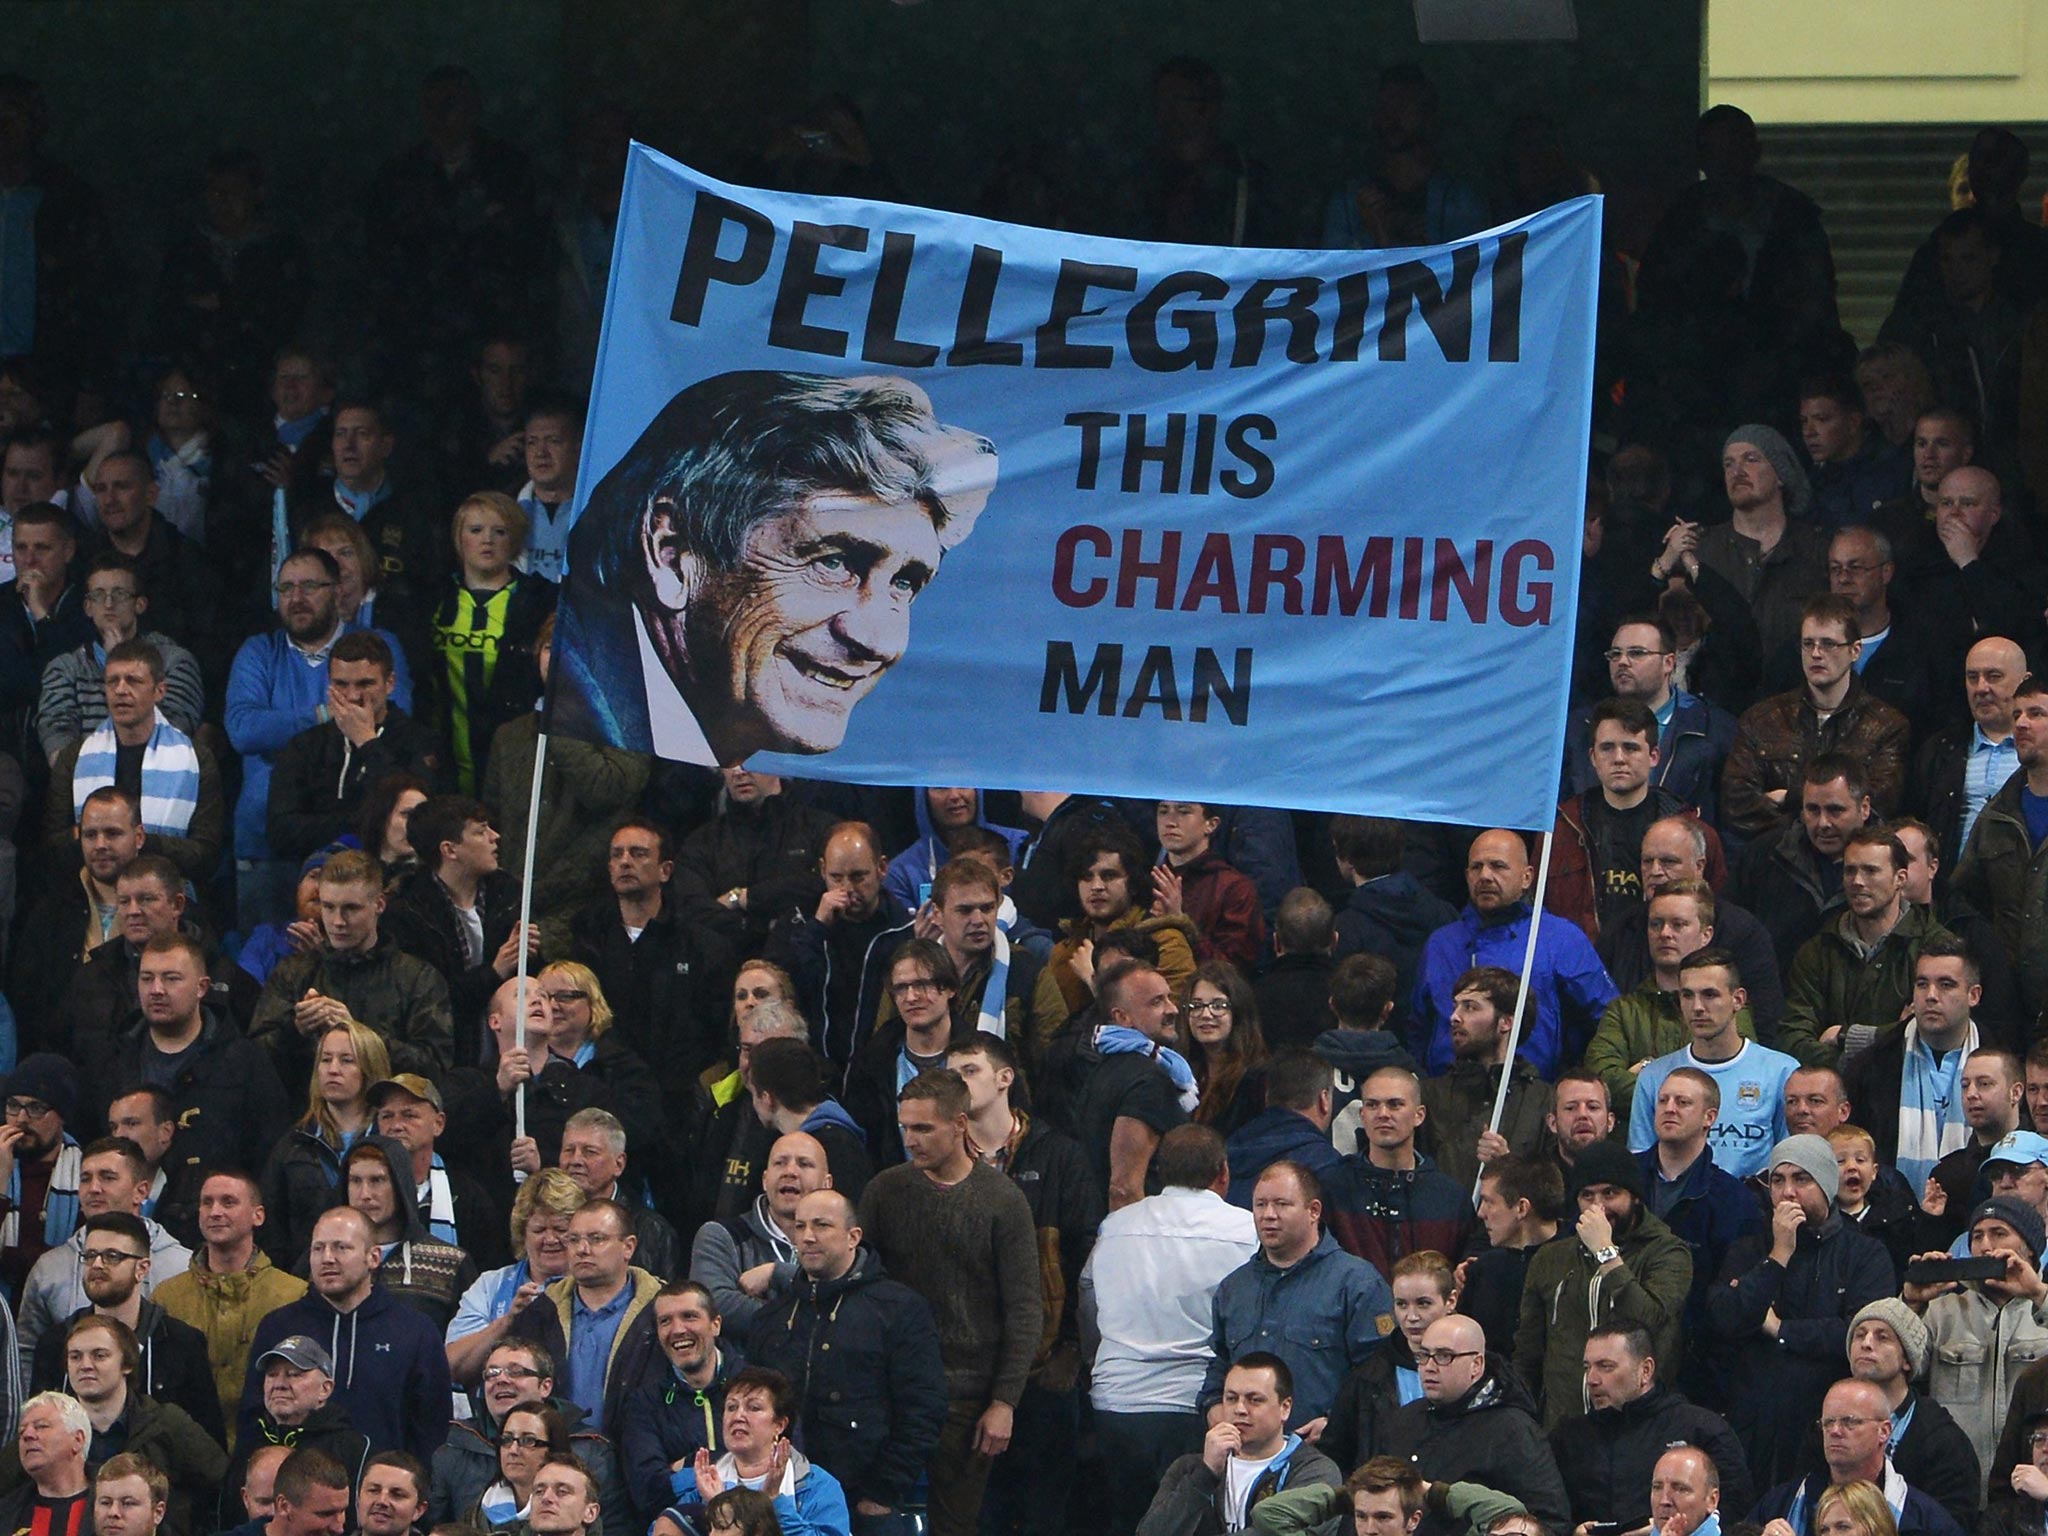 Manchester City fans fly a flag for Manuel Pellegrini, manager of Manchester City